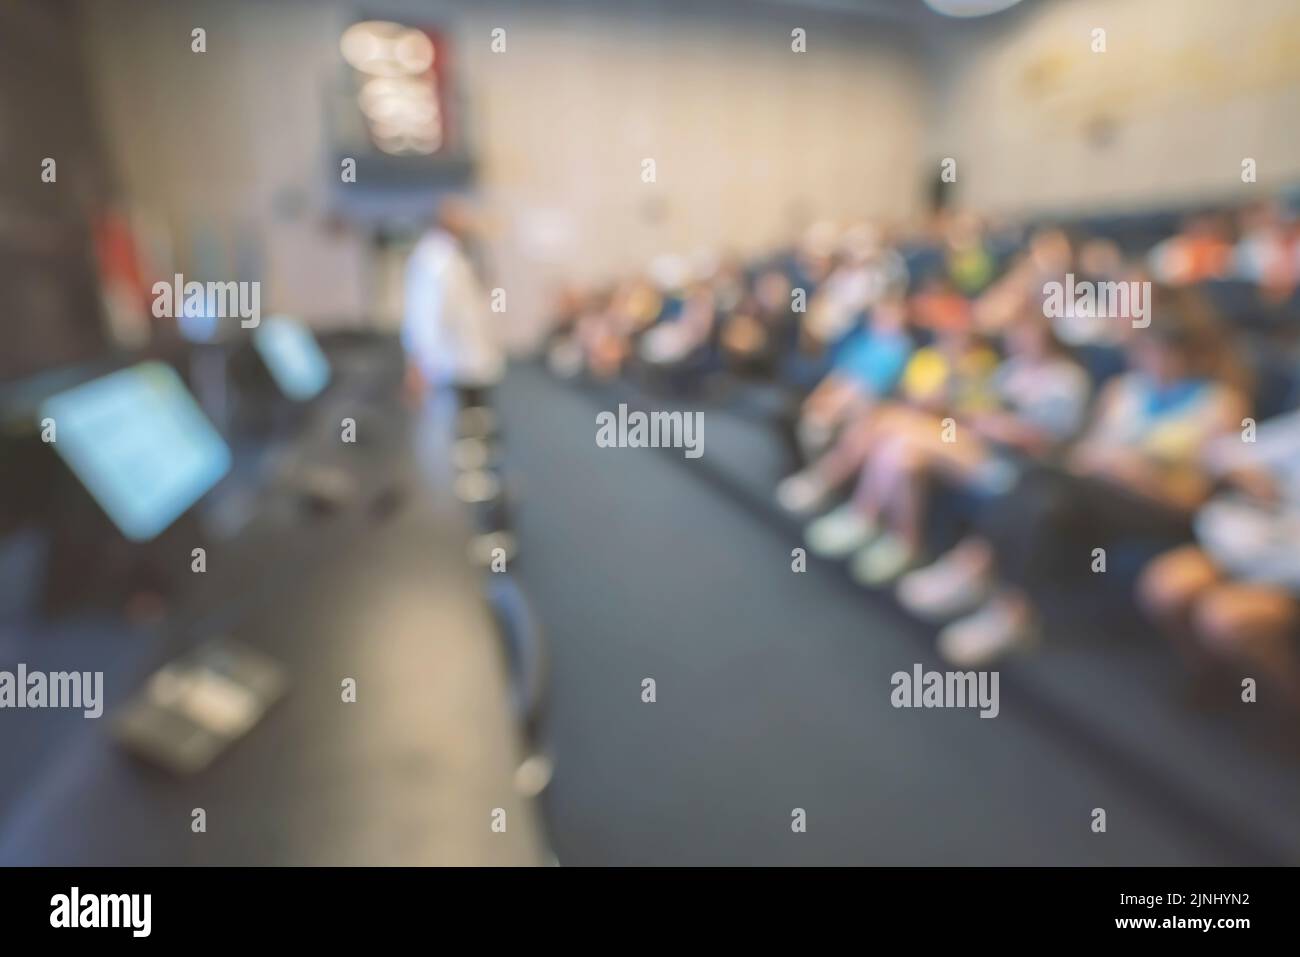 Abstract blurred people lecture in seminar room, education concept. High quality photo Stock Photo